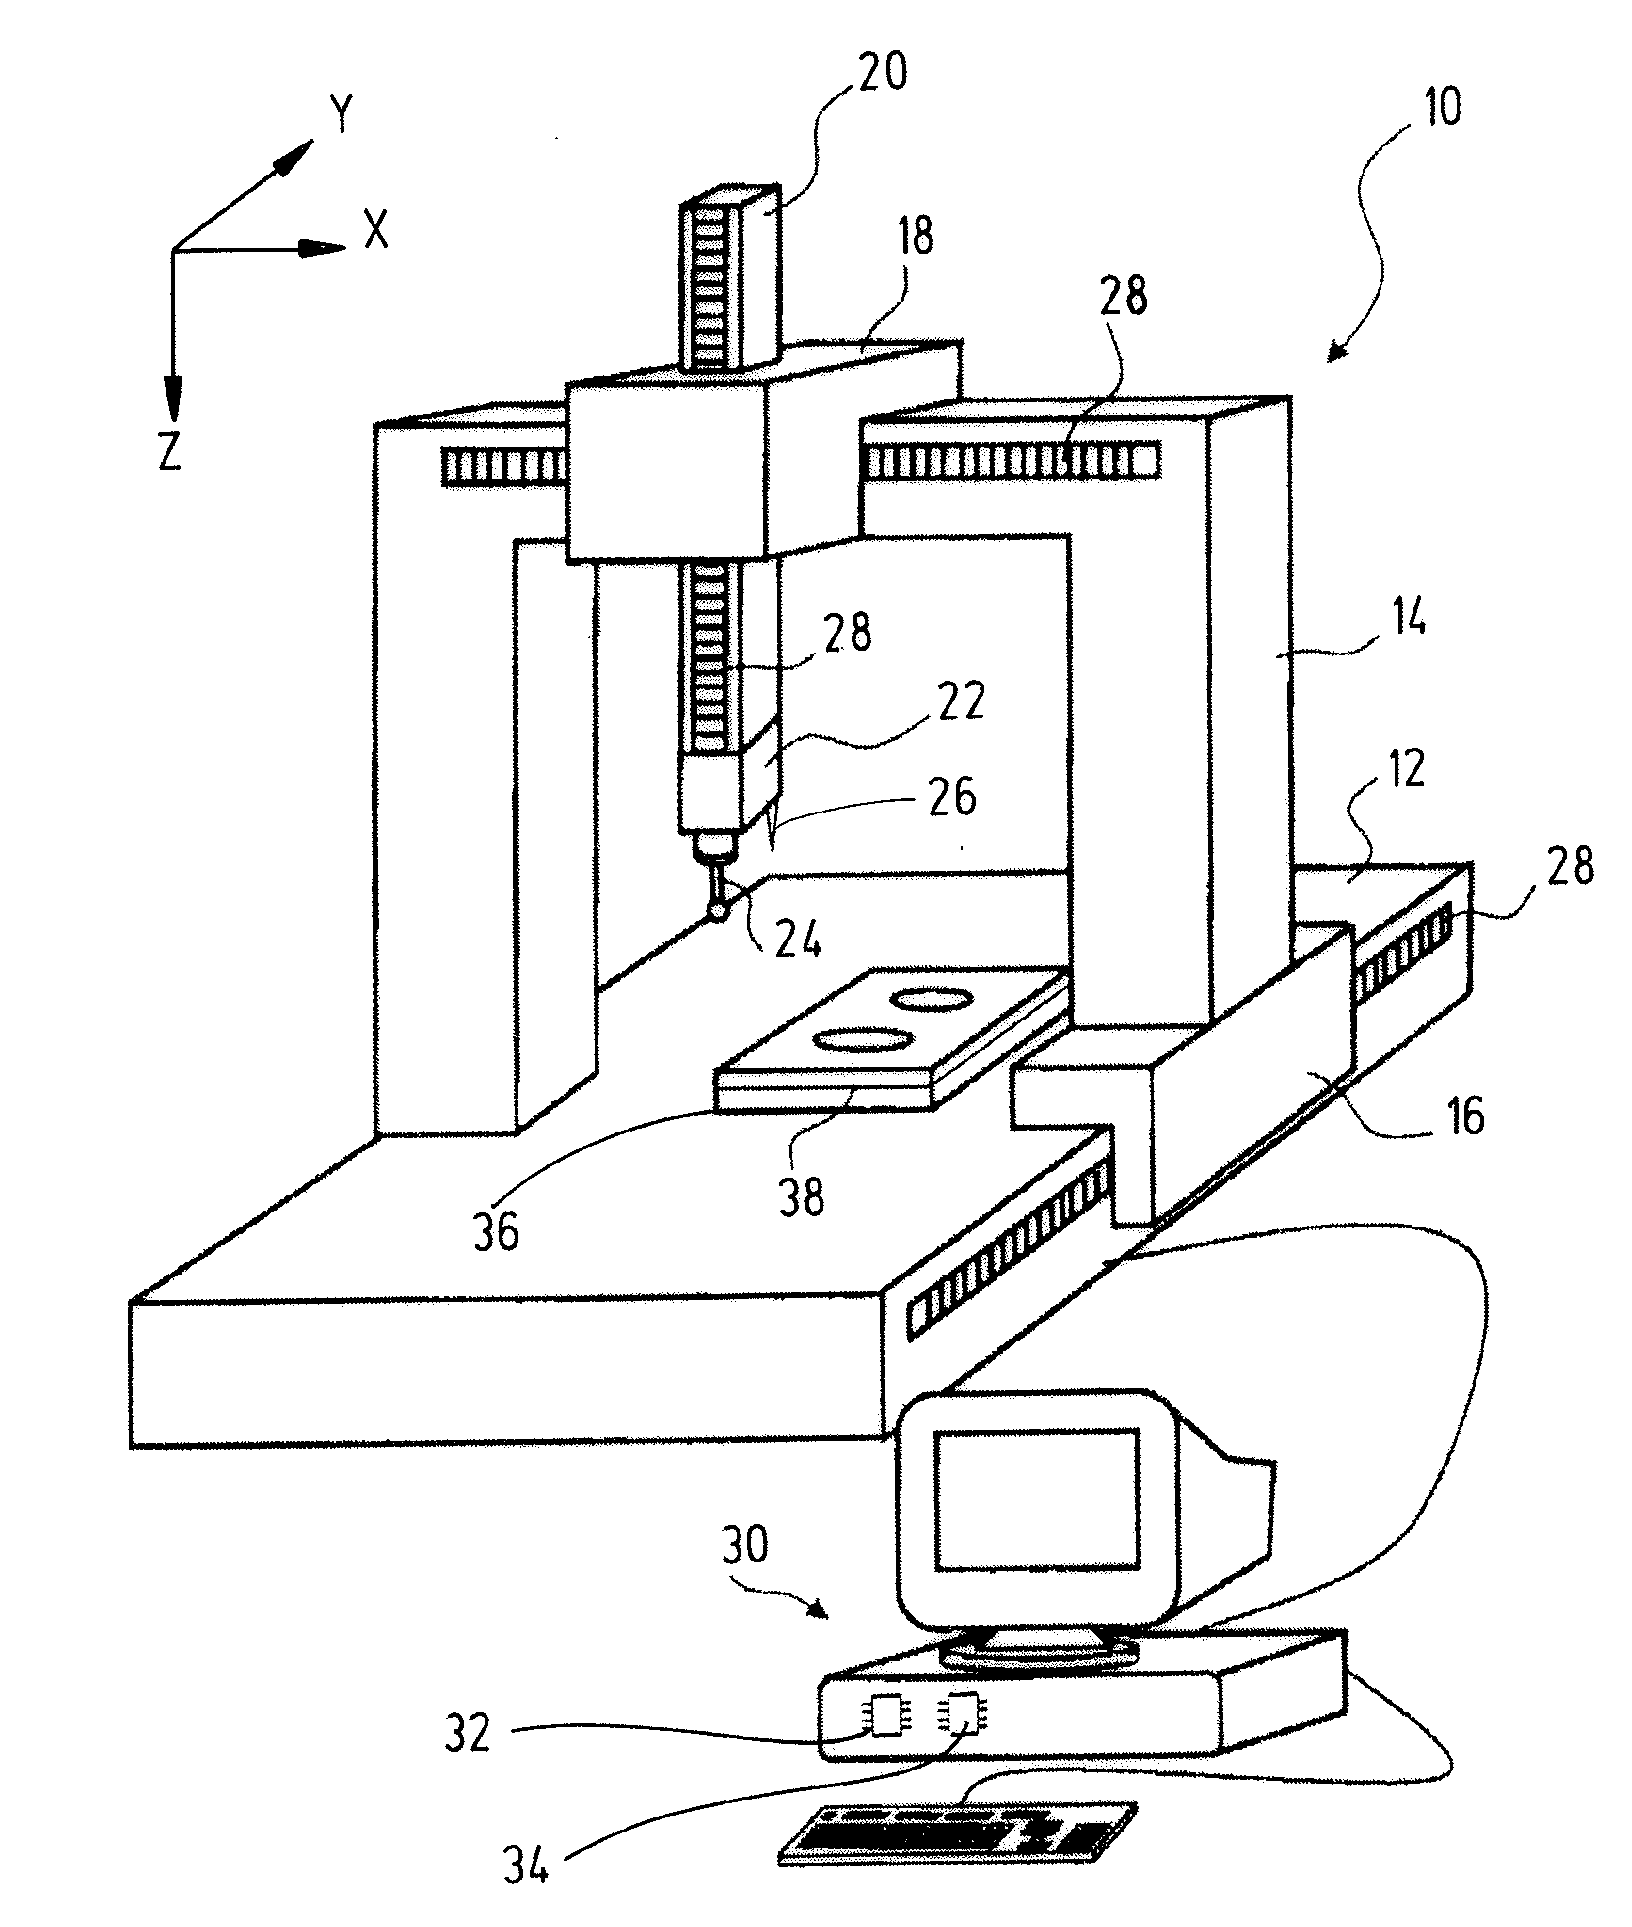 Method and arrangement for producing a workpiece by using additive manufacturing techniques